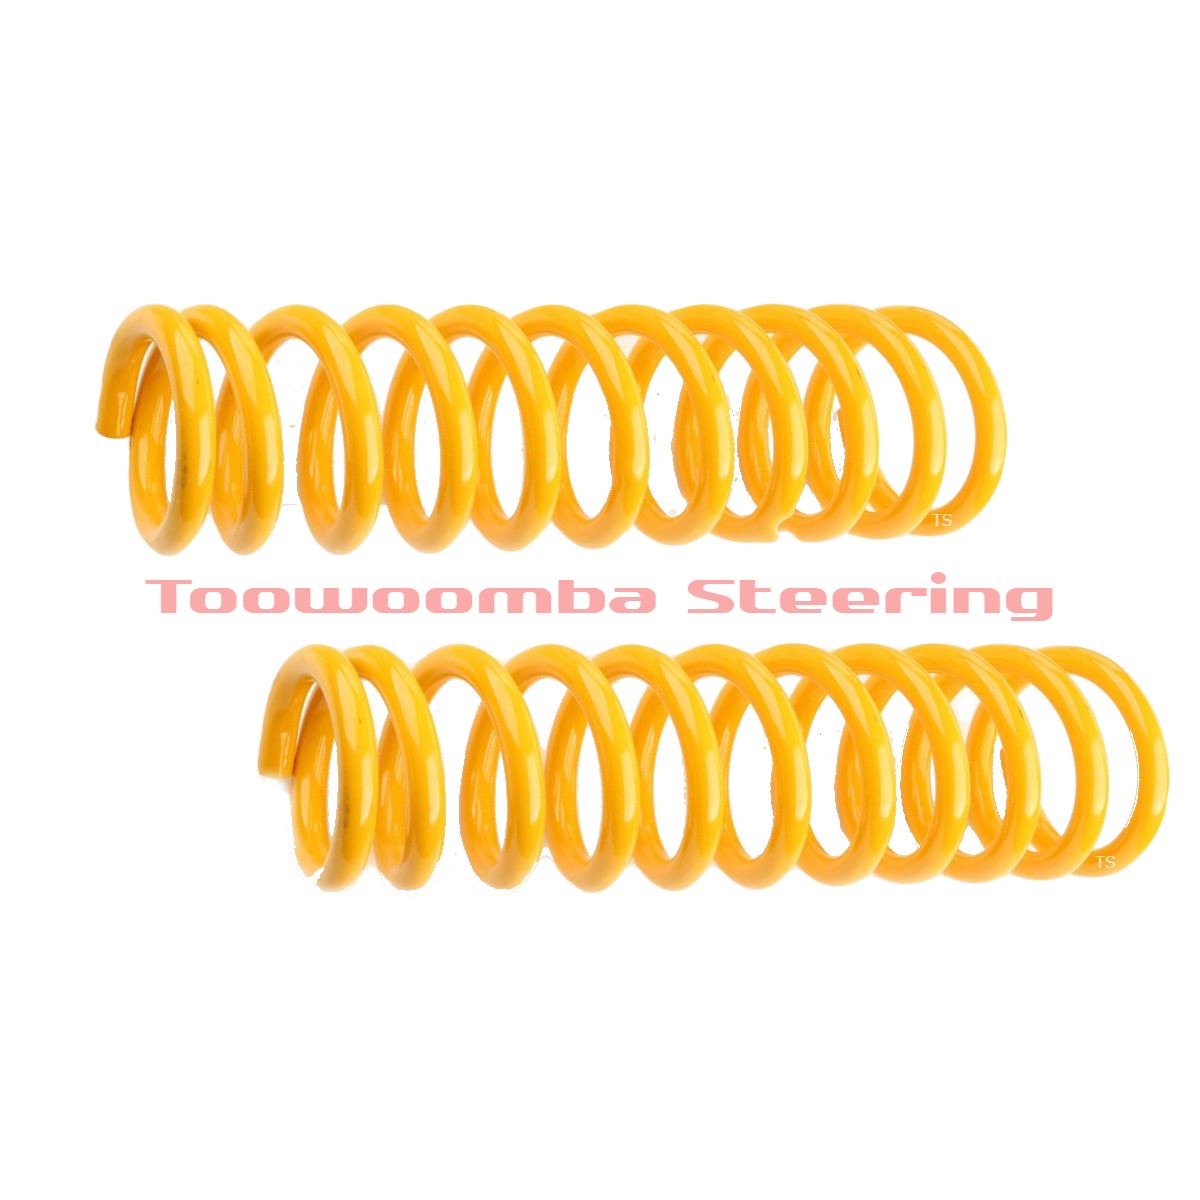 Rear Standard Height King Coil Springs - Ideal for - Holden Commodore VT; VX; VY 6CYL SEDAN 97-7/04, Commodore VT; VX; VY; VZ 8CYL SEDAN 97-7/06, Commodore VZ 6CYL SEDAN 8/04-05, Statesman WH; WK; WL 1999 – 7/2006 - (KHRS-125)